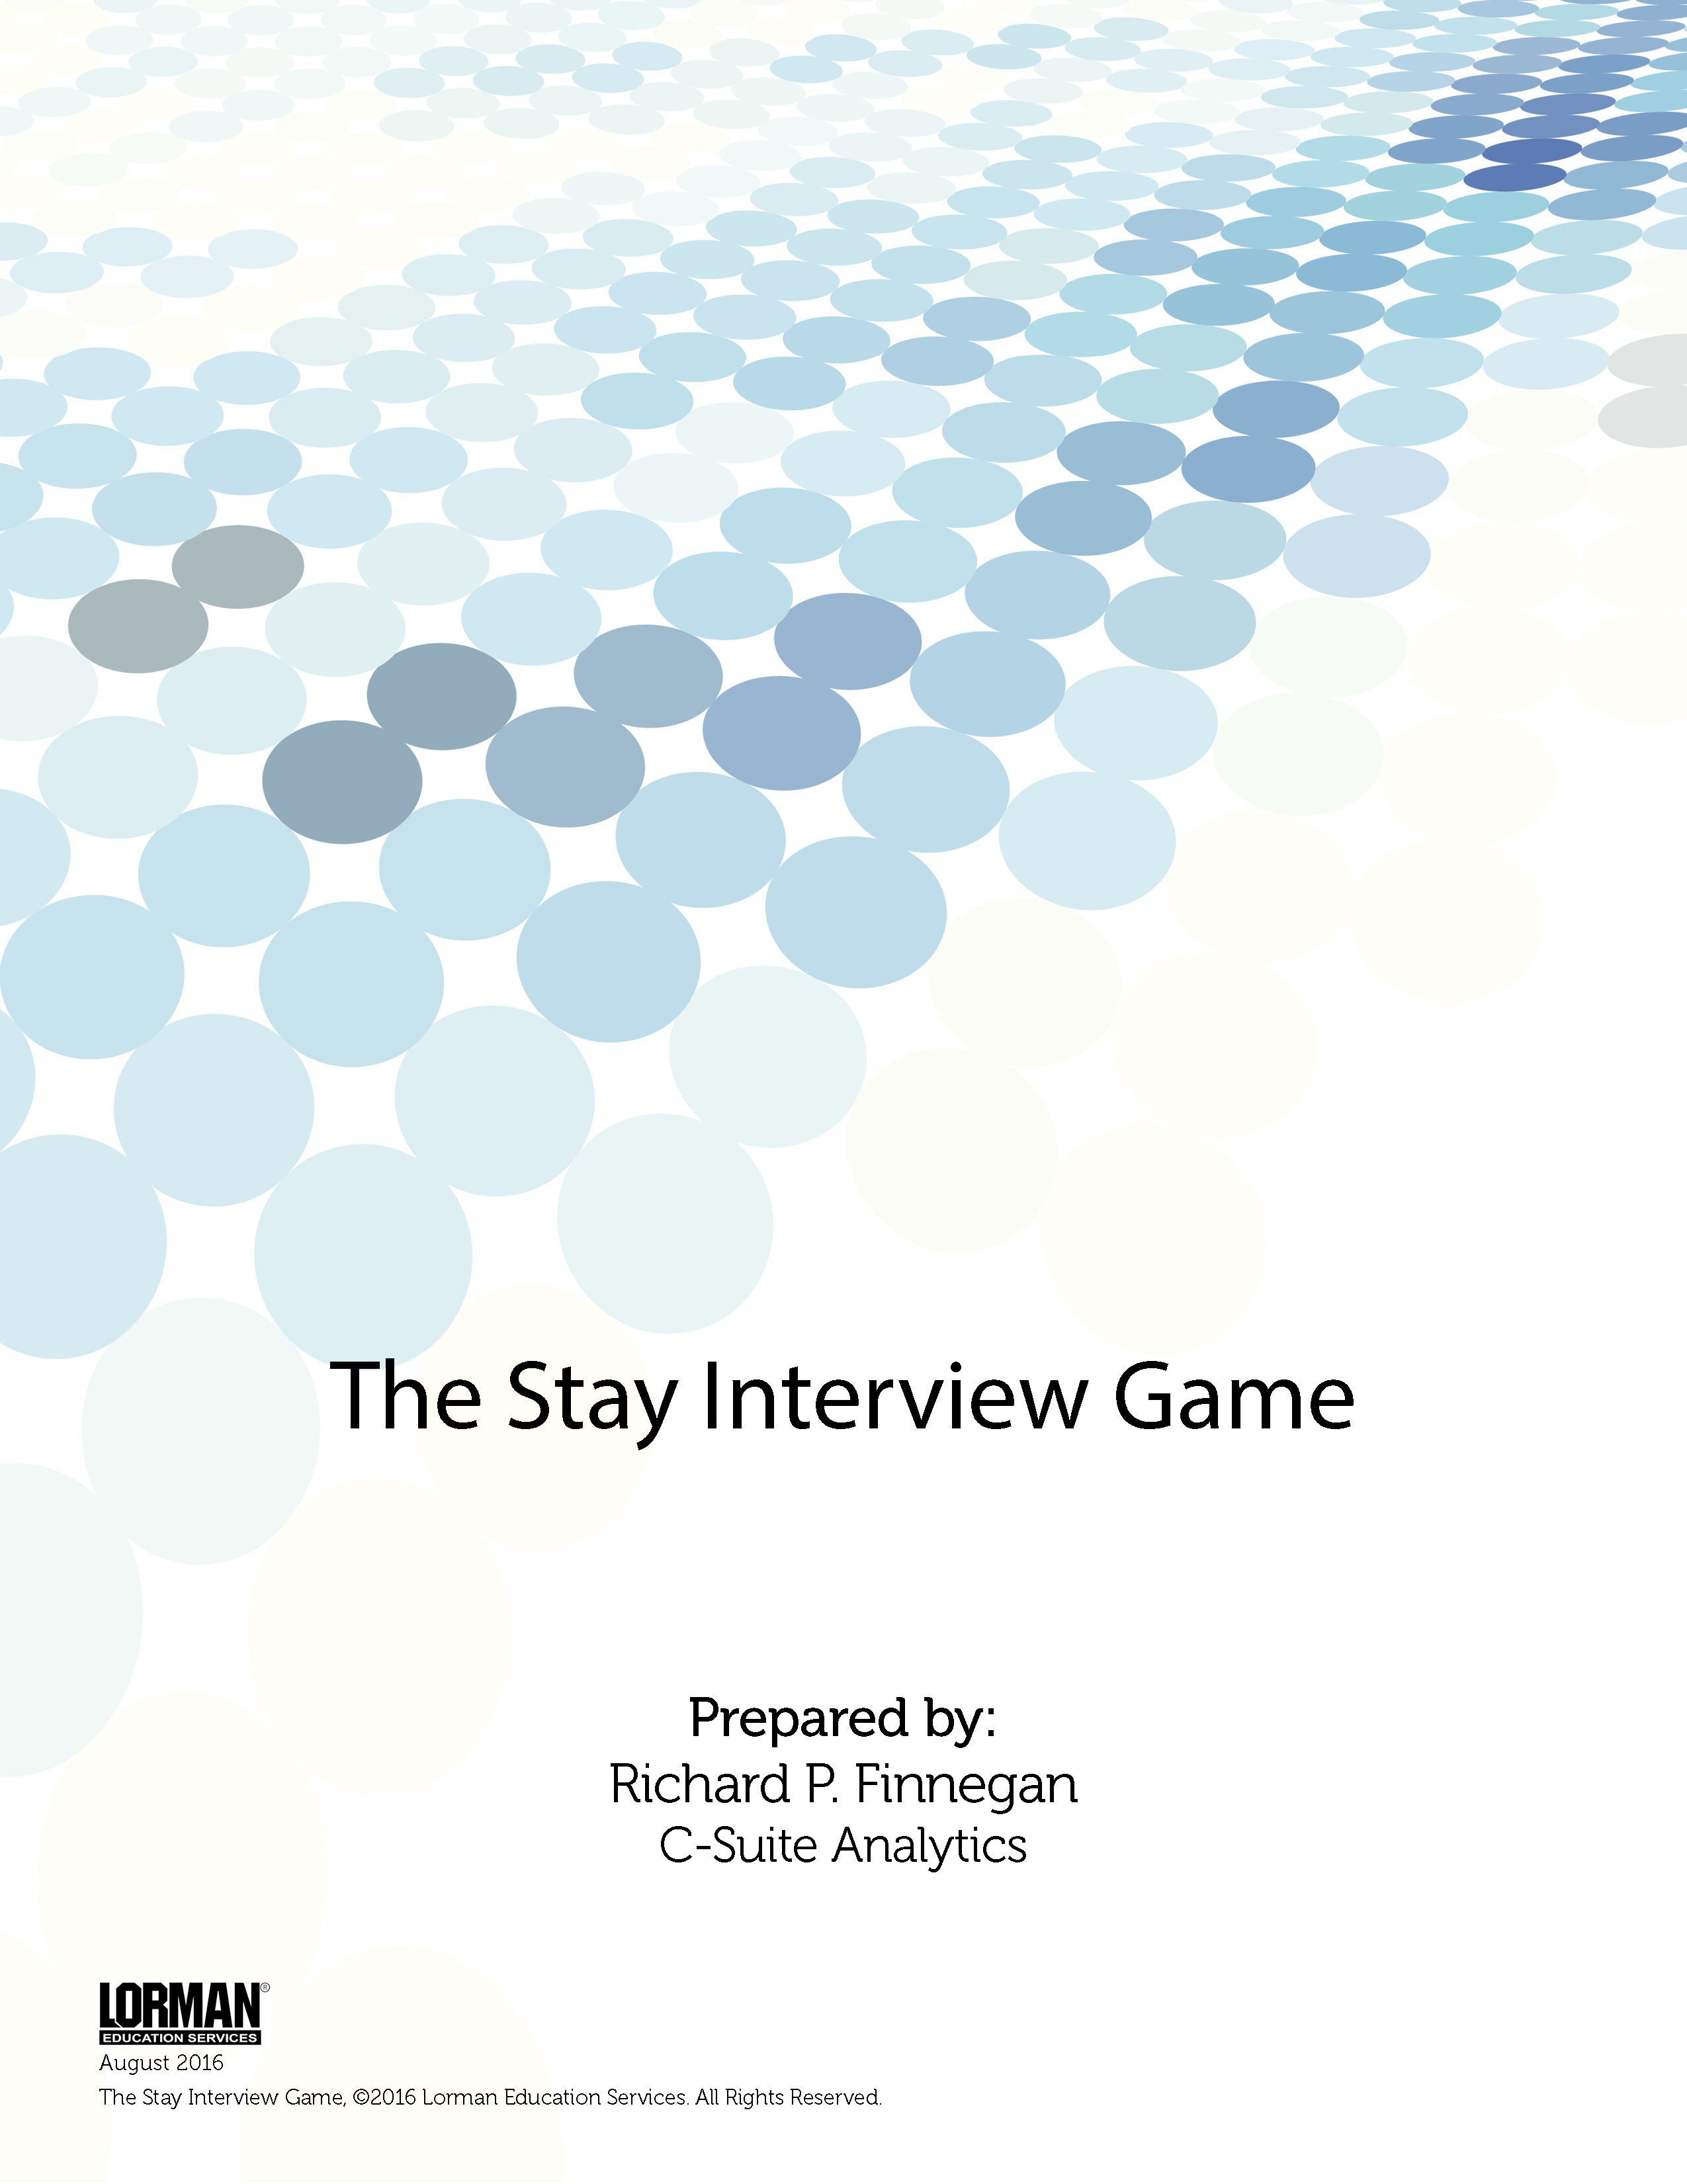 The Stay Interview Game